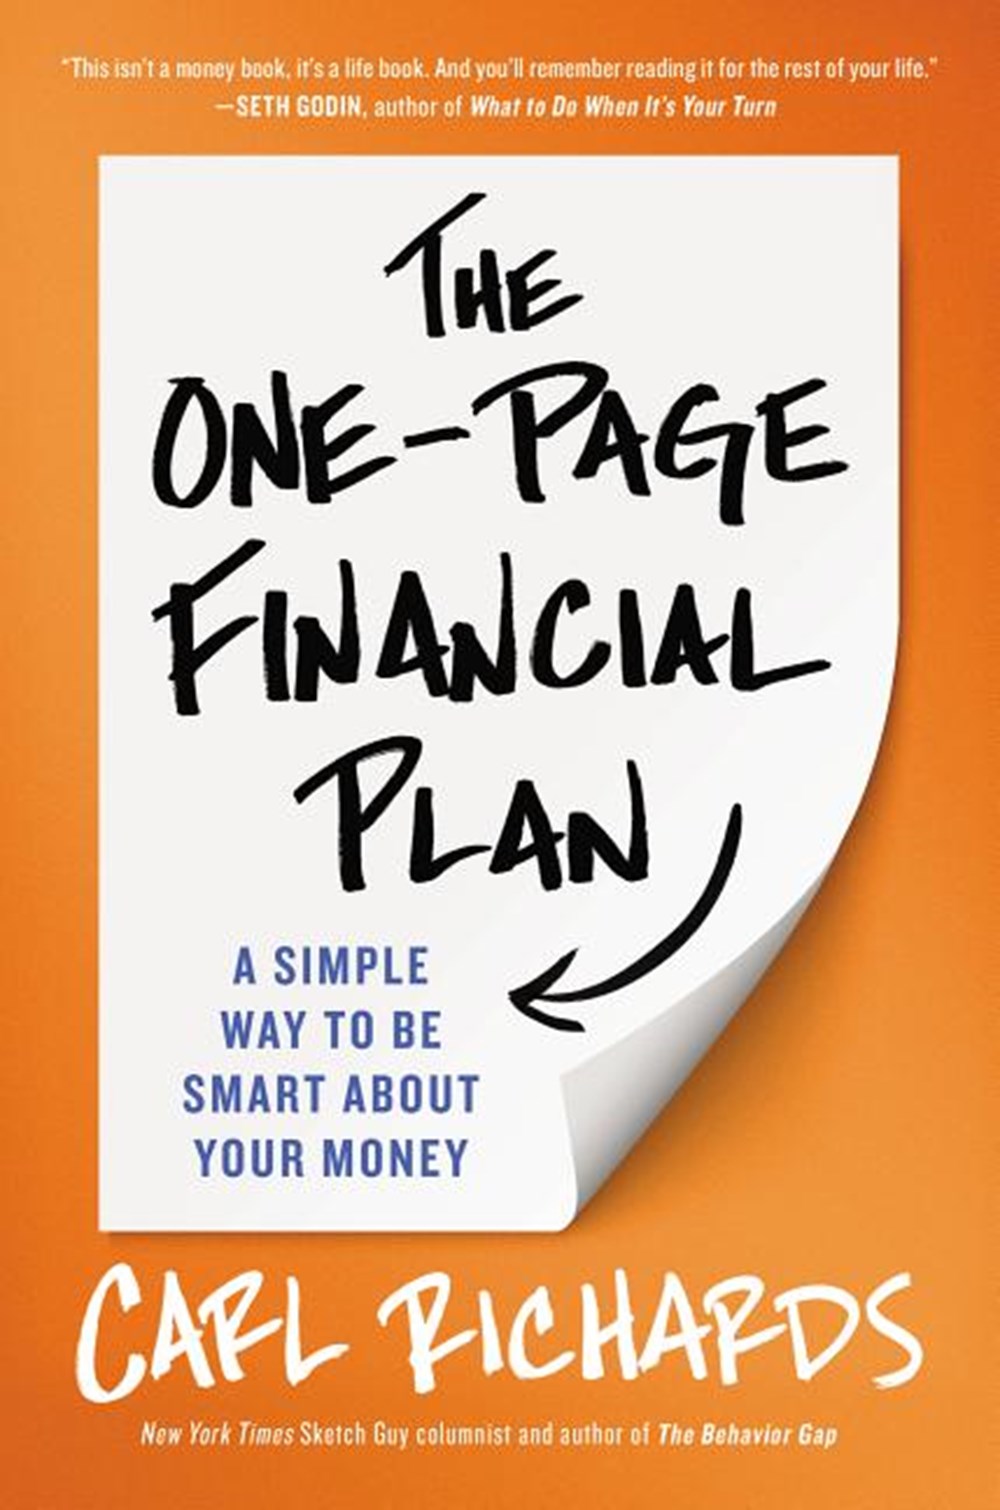 One-Page Financial Plan A Simple Way to Be Smart about Your Money